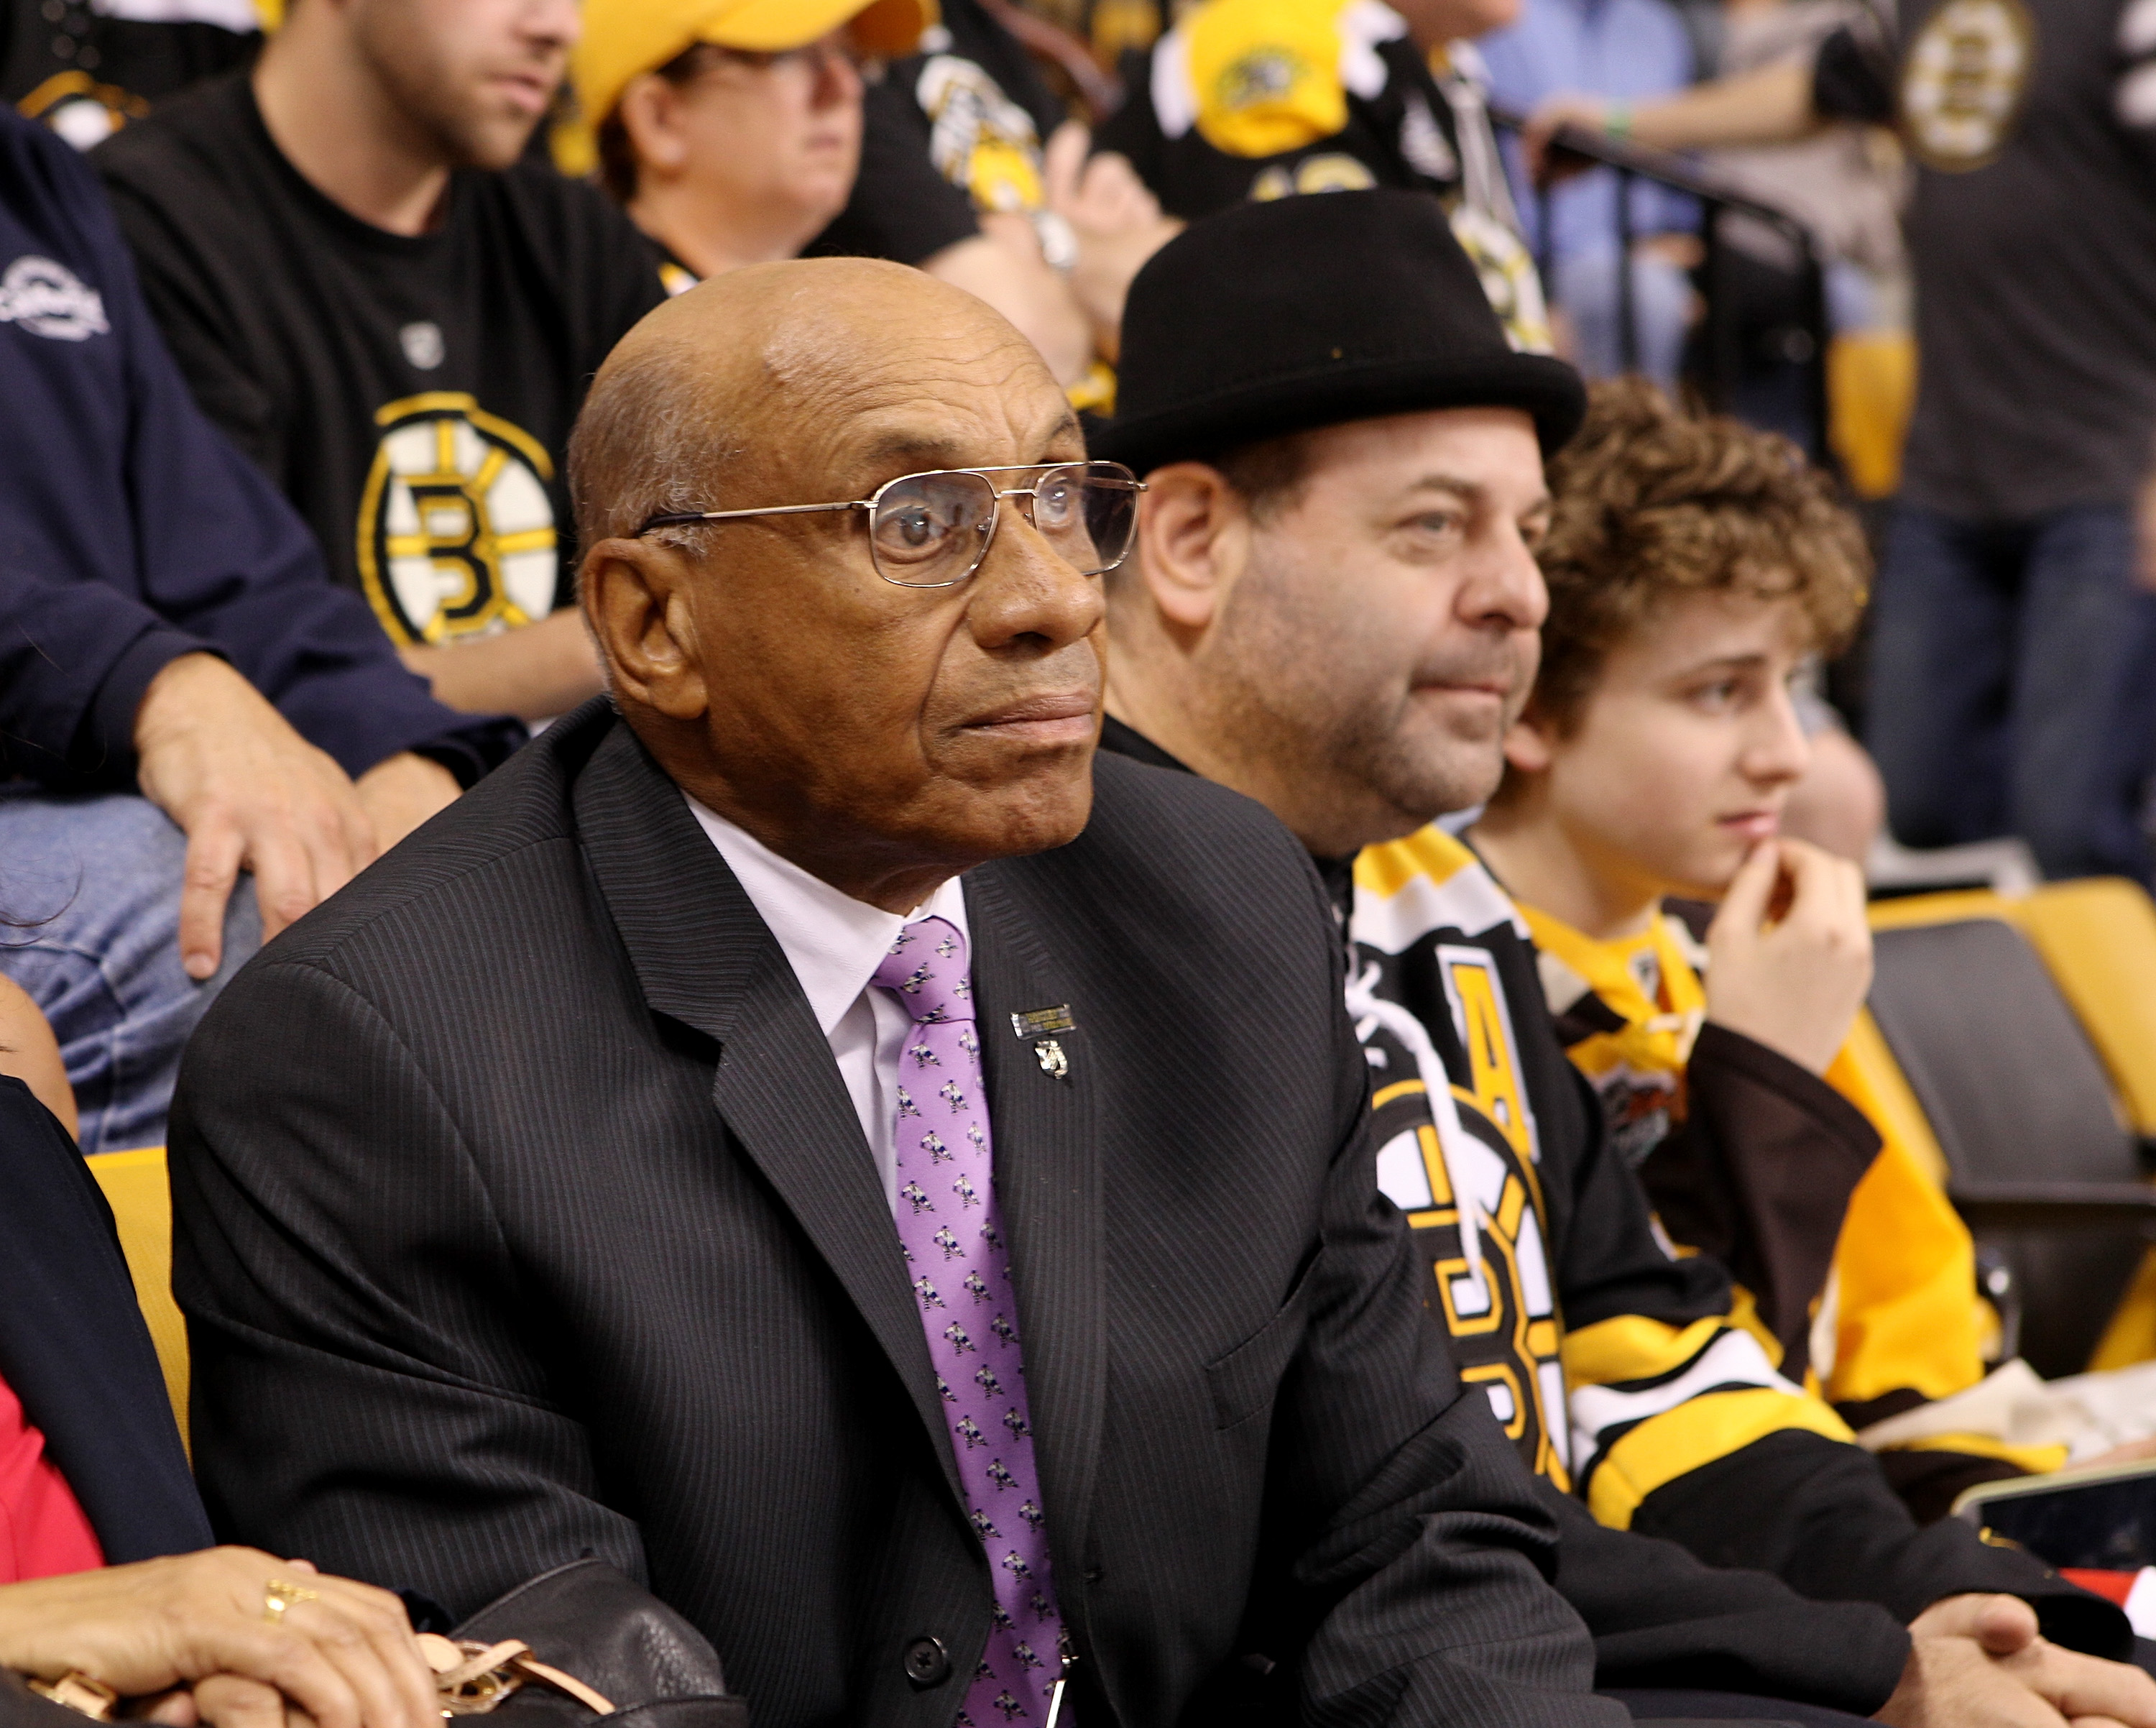 willie o'ree, 1961: scored that one for the whole town of